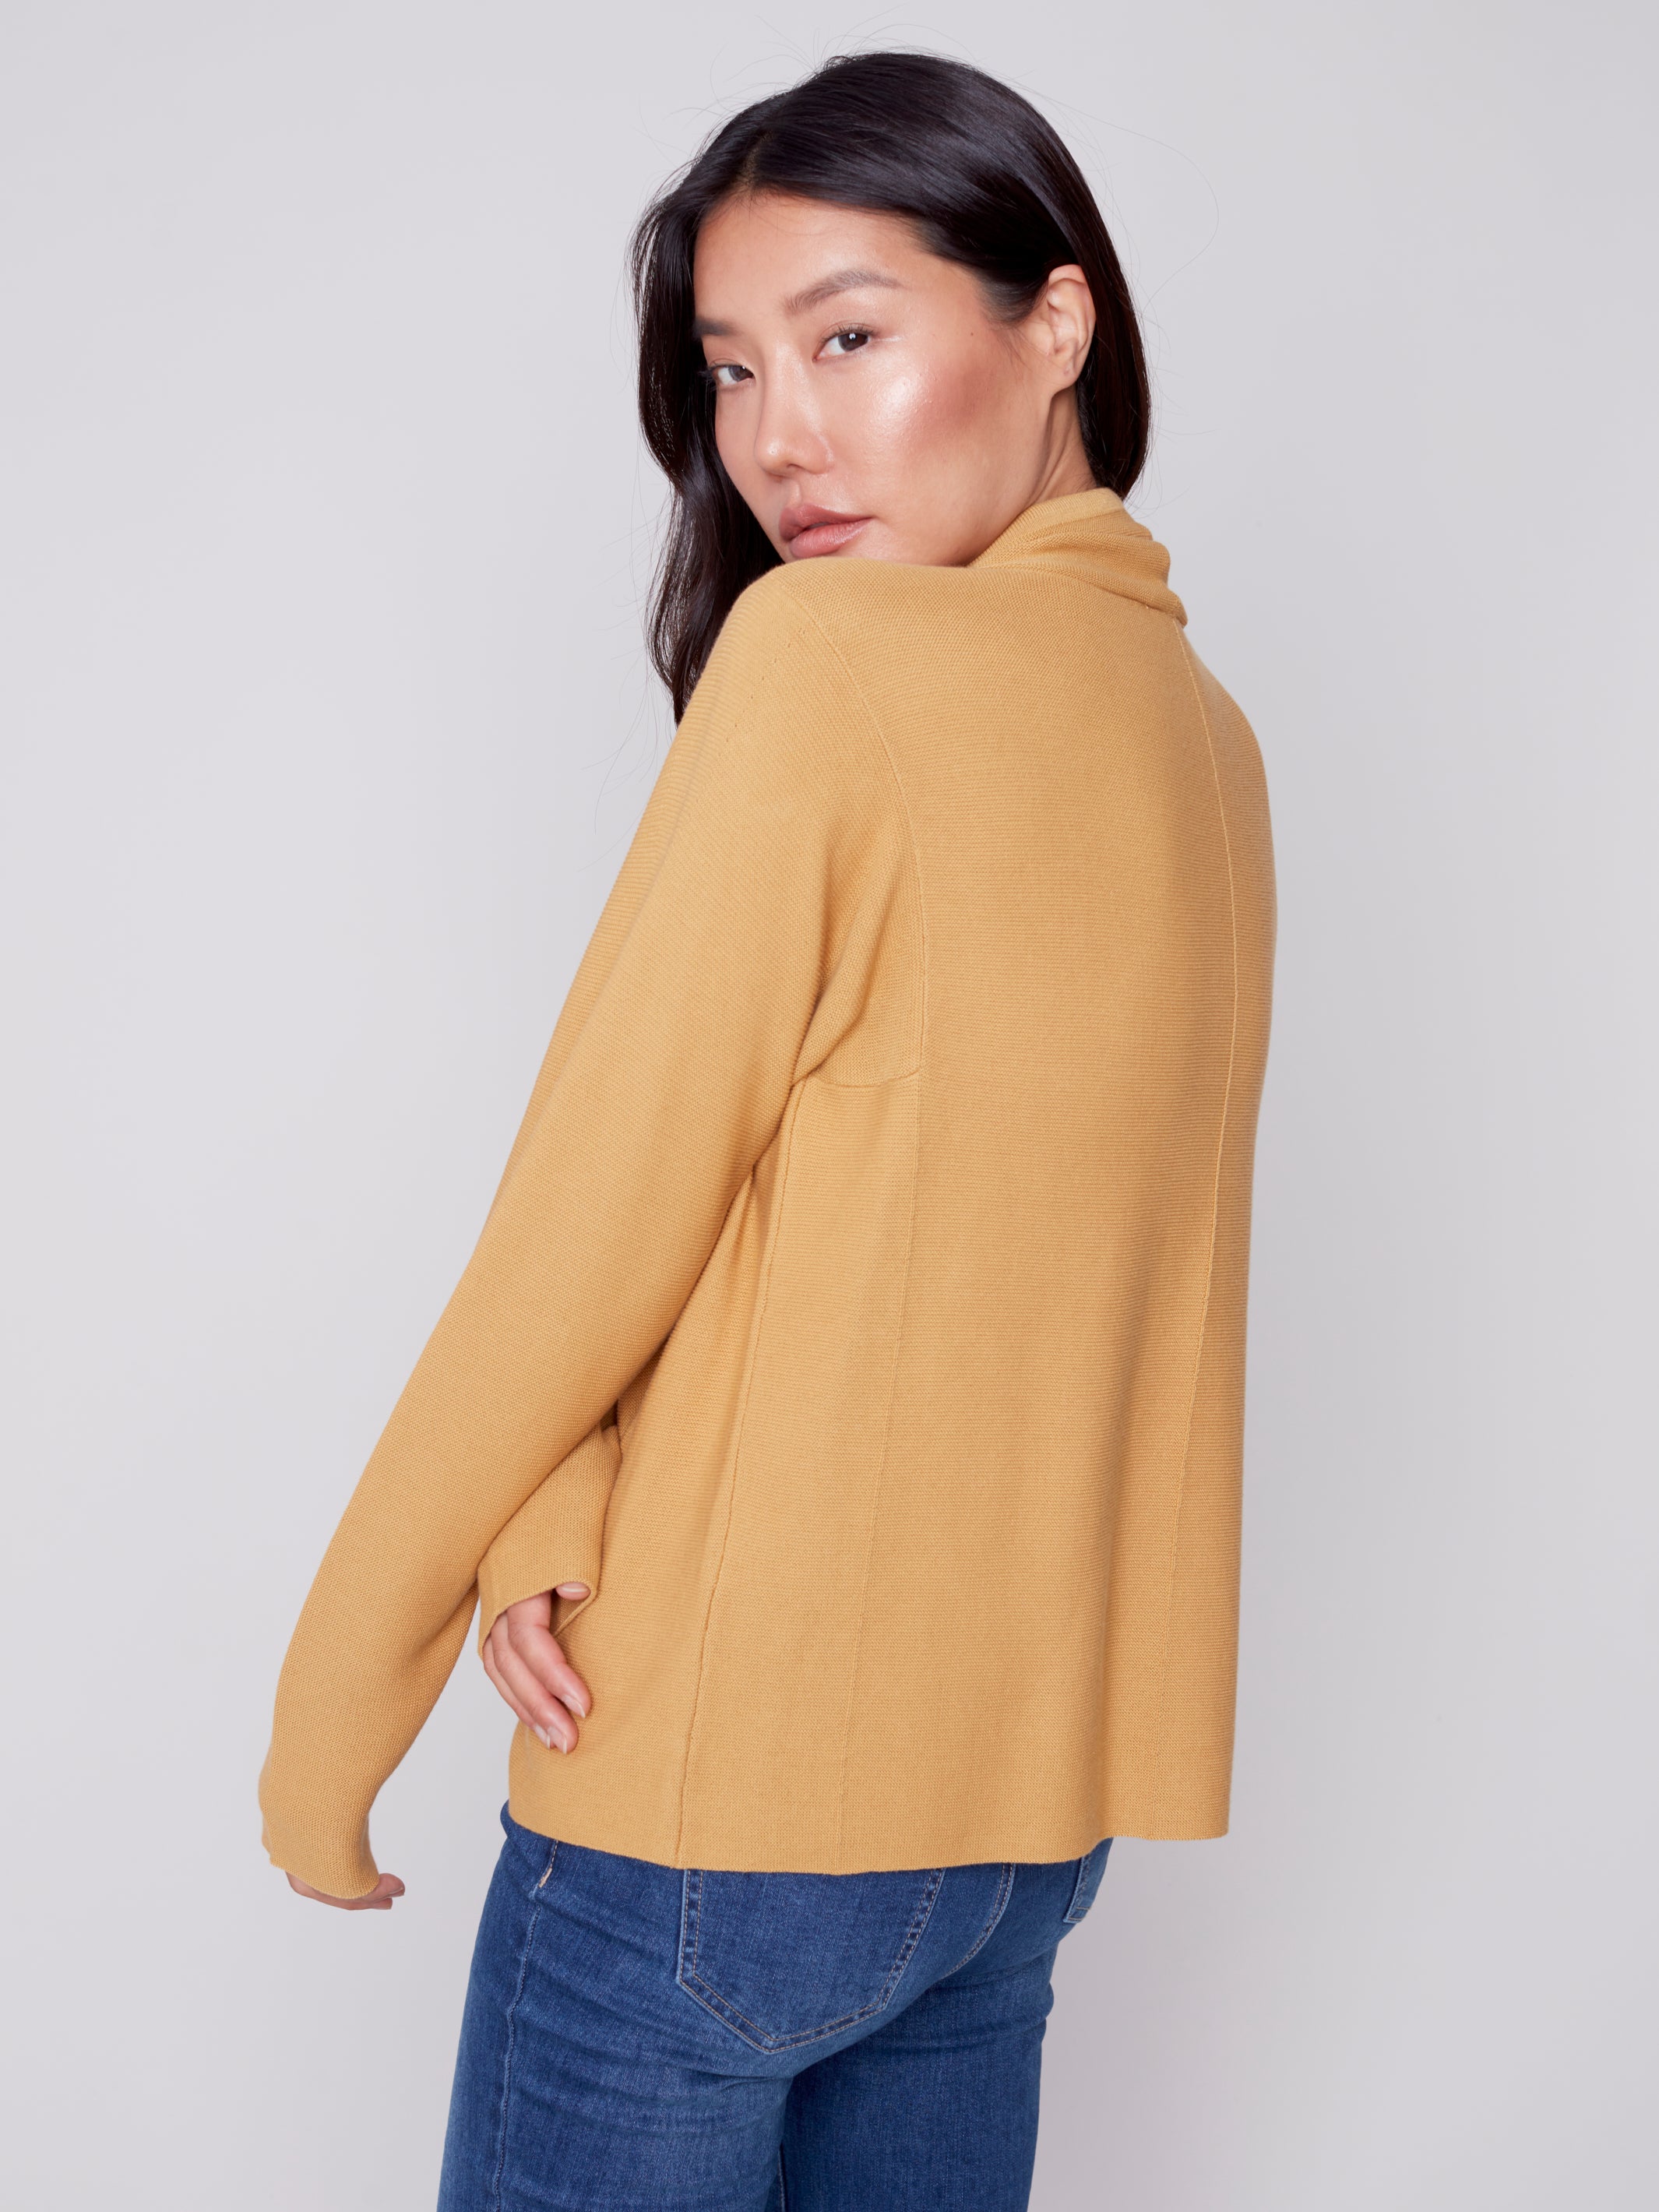 Charlie B Cotton Funnel Neck Sweater - Gold